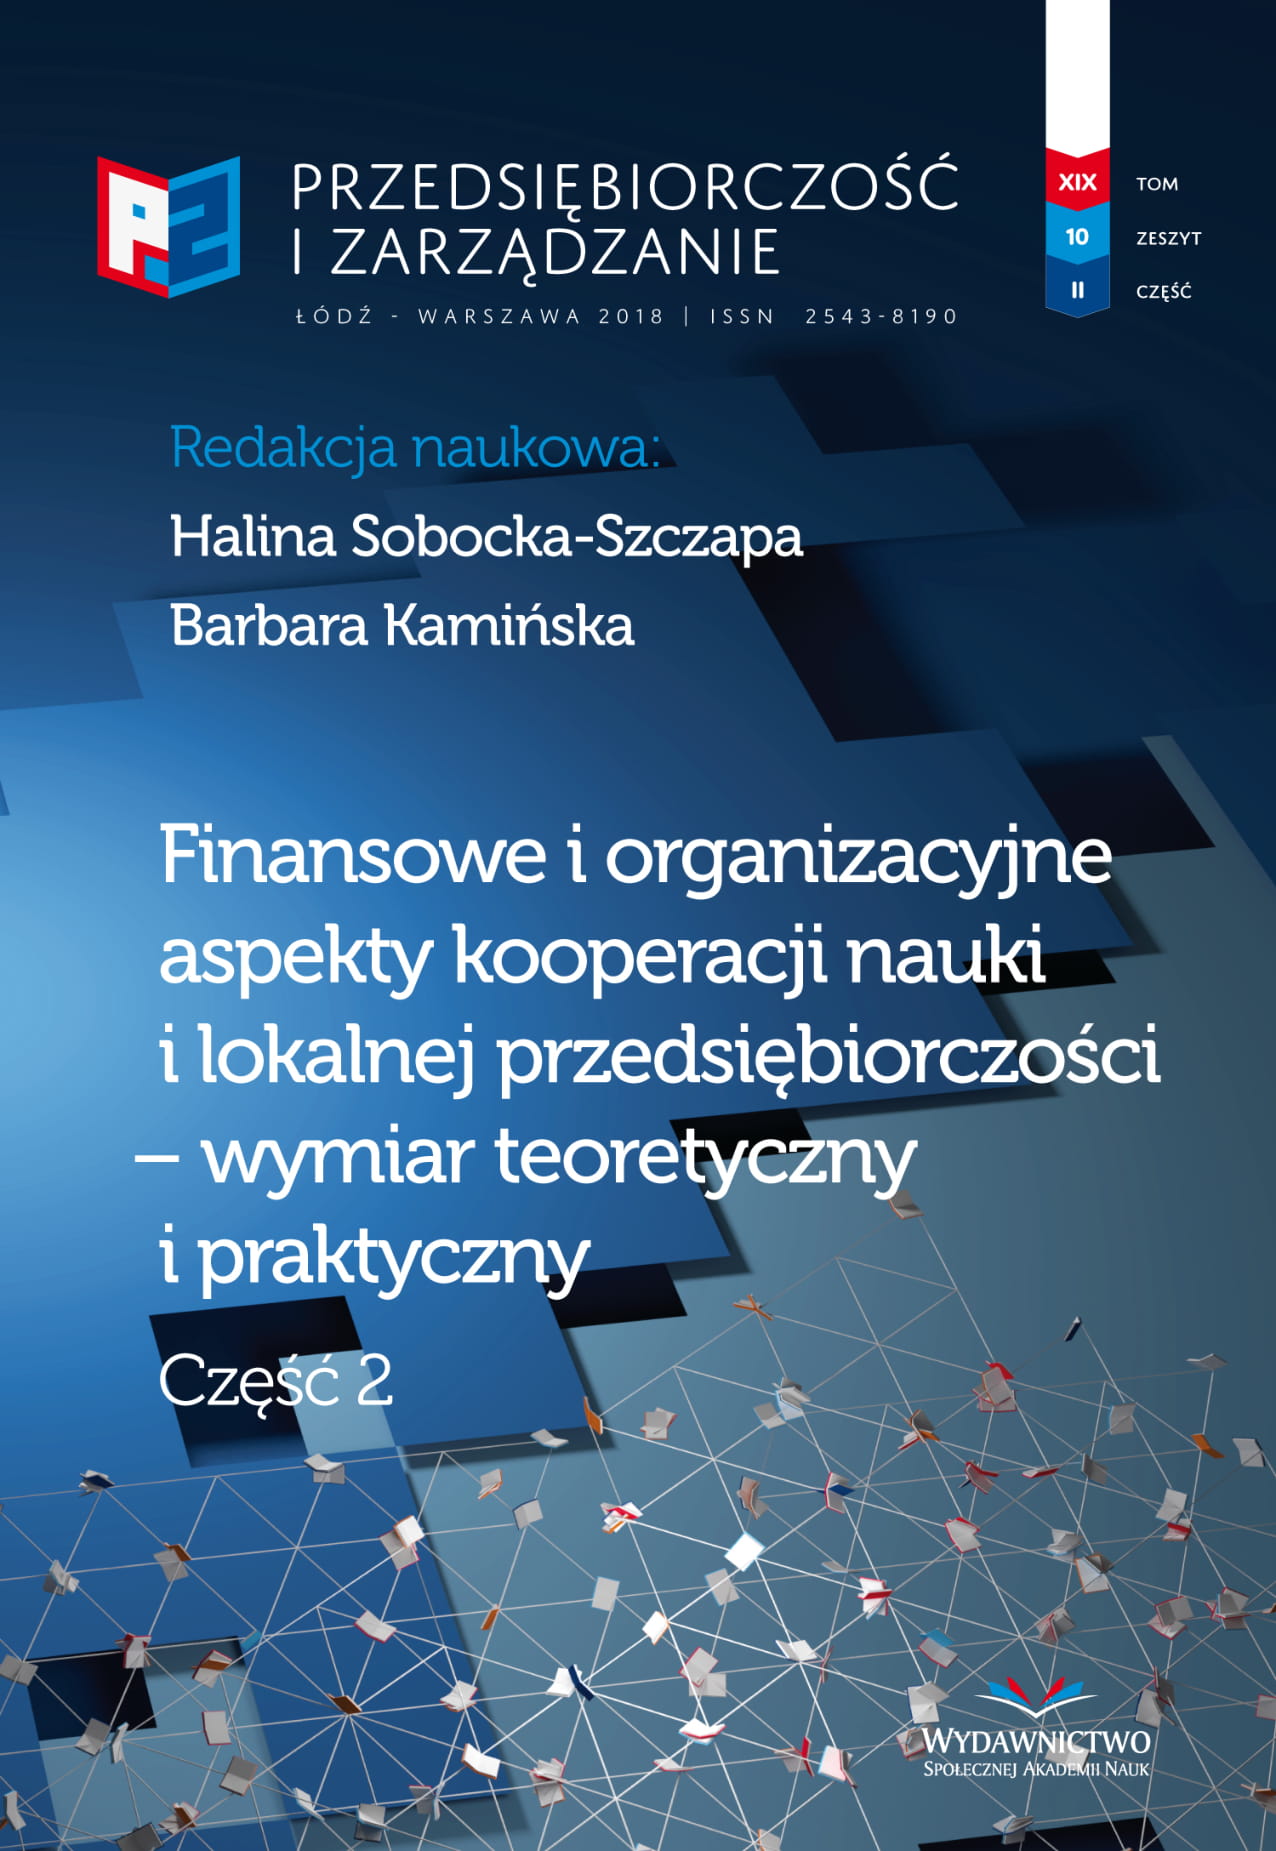 State Aid for SME Innovation Projects in Poland
and Sustainable Development Standards